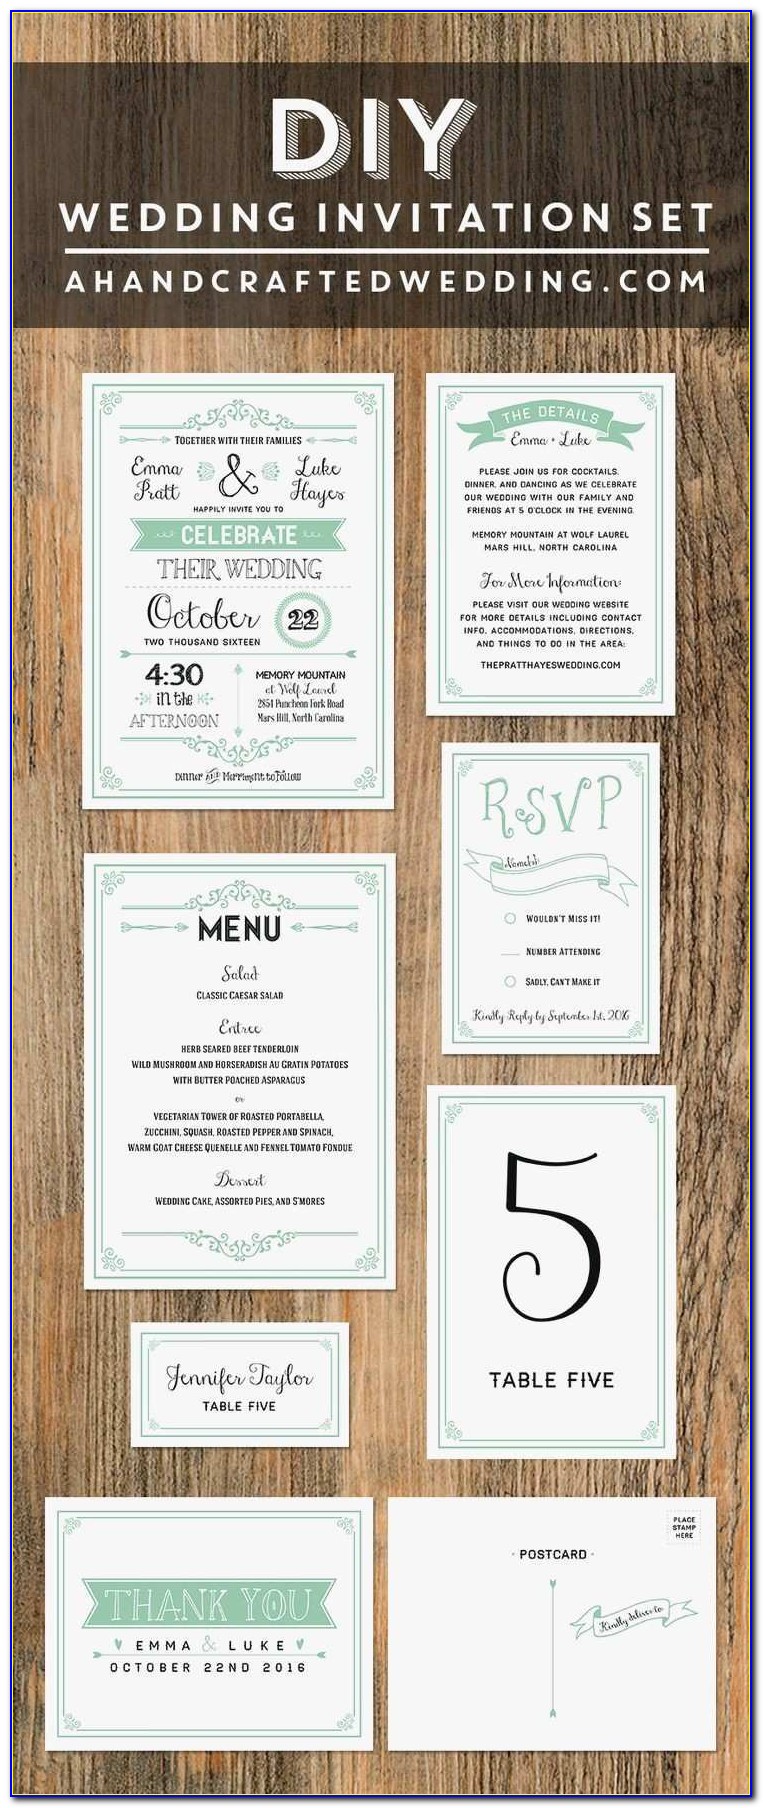 Wedding Invitation Templates Free Download Publisher Beautiful 11 Best Free Wedding Invitation Templates & Printables Images On